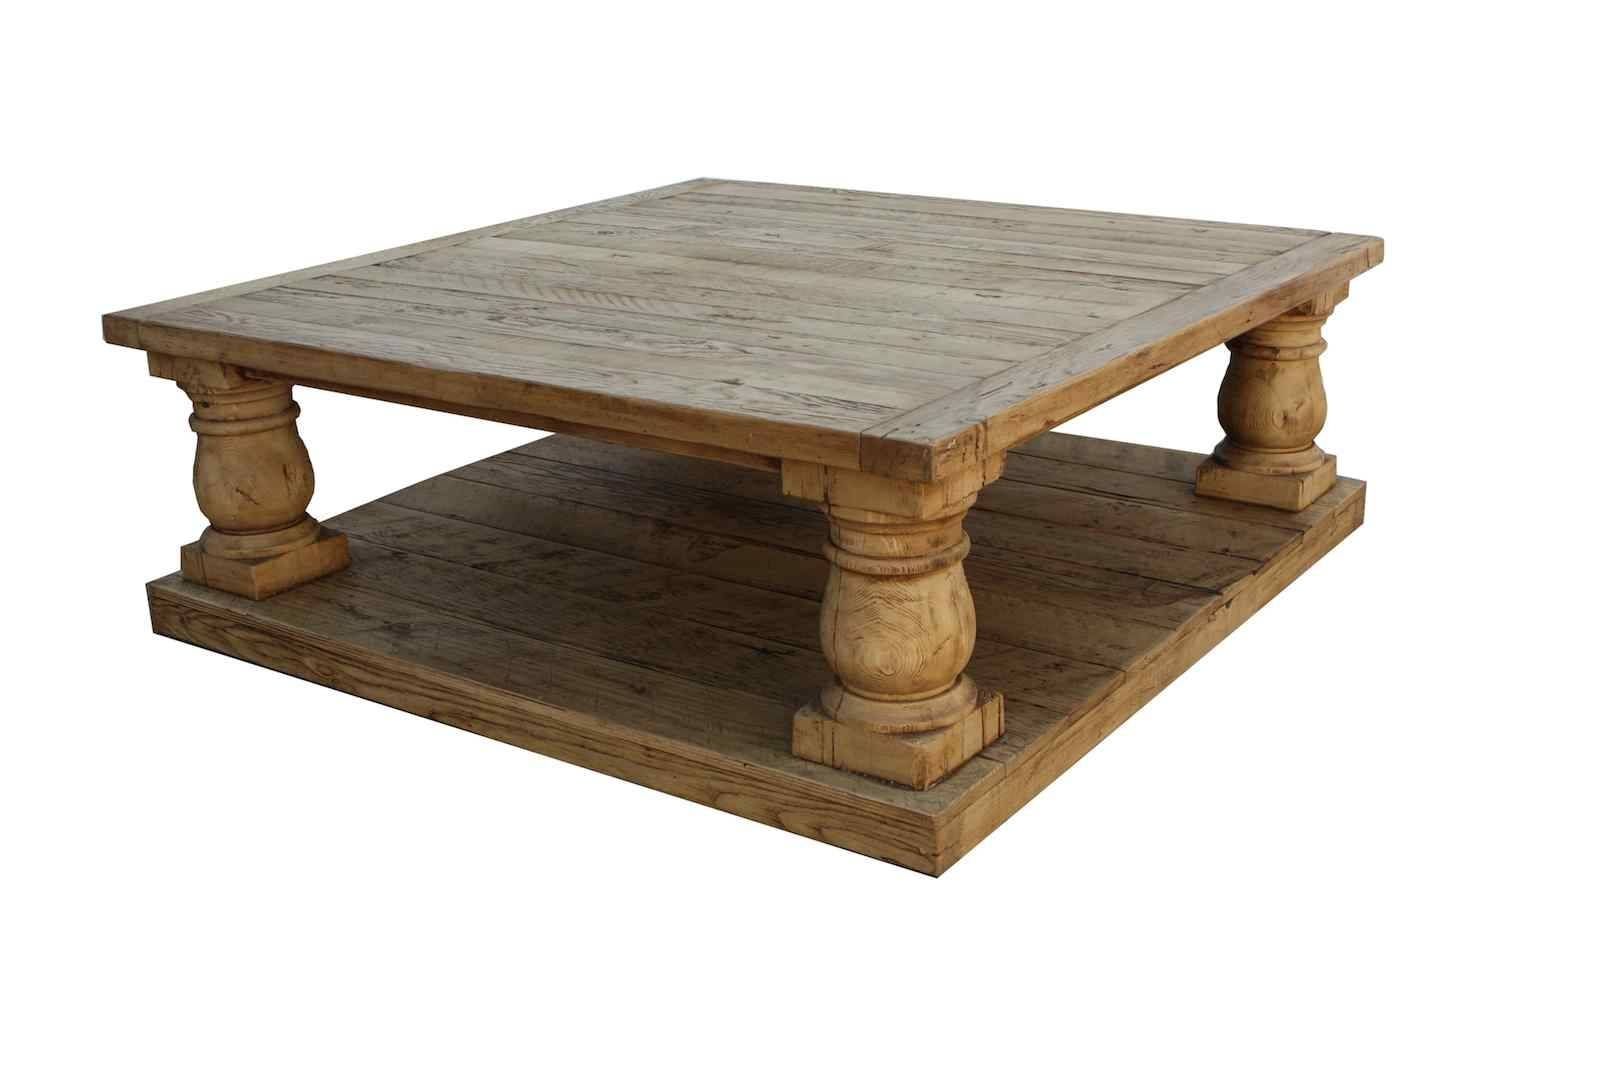 Coffee Table: Inspiringsquare Wooden Coffee Table Design Ideas Throughout Large Square Wood Coffee Tables (View 1 of 30)